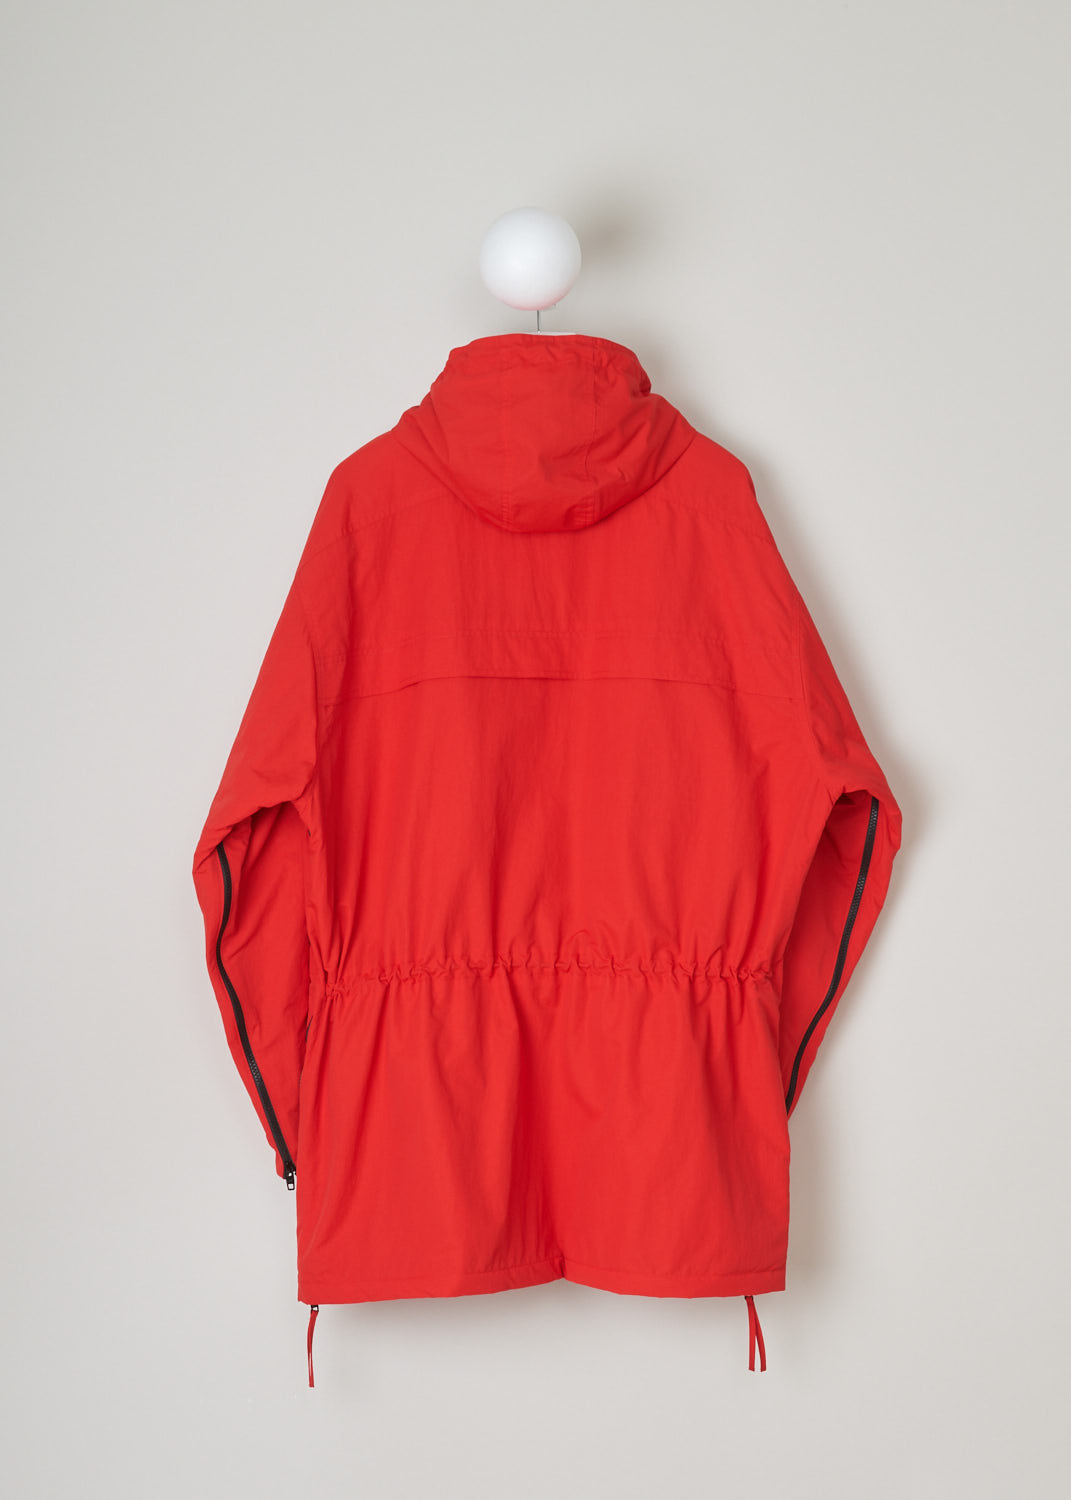 Balenciaga, Red parka model, 646774_TJ014_6400, red, back. Red oversized parka has lots of features beginning with the hood which is lined and detachable with press buttons. Going down this model has 4 pockets 2 on chest height 2 below that, with al the pockets being forward slanted. There is a cord tunnel on the inside with which the width of the waist can be adjusted. The fun part of this parka is the zipper which starts from the sides going up to the armpit and ending on the sleeves. Comes with zip fastening 